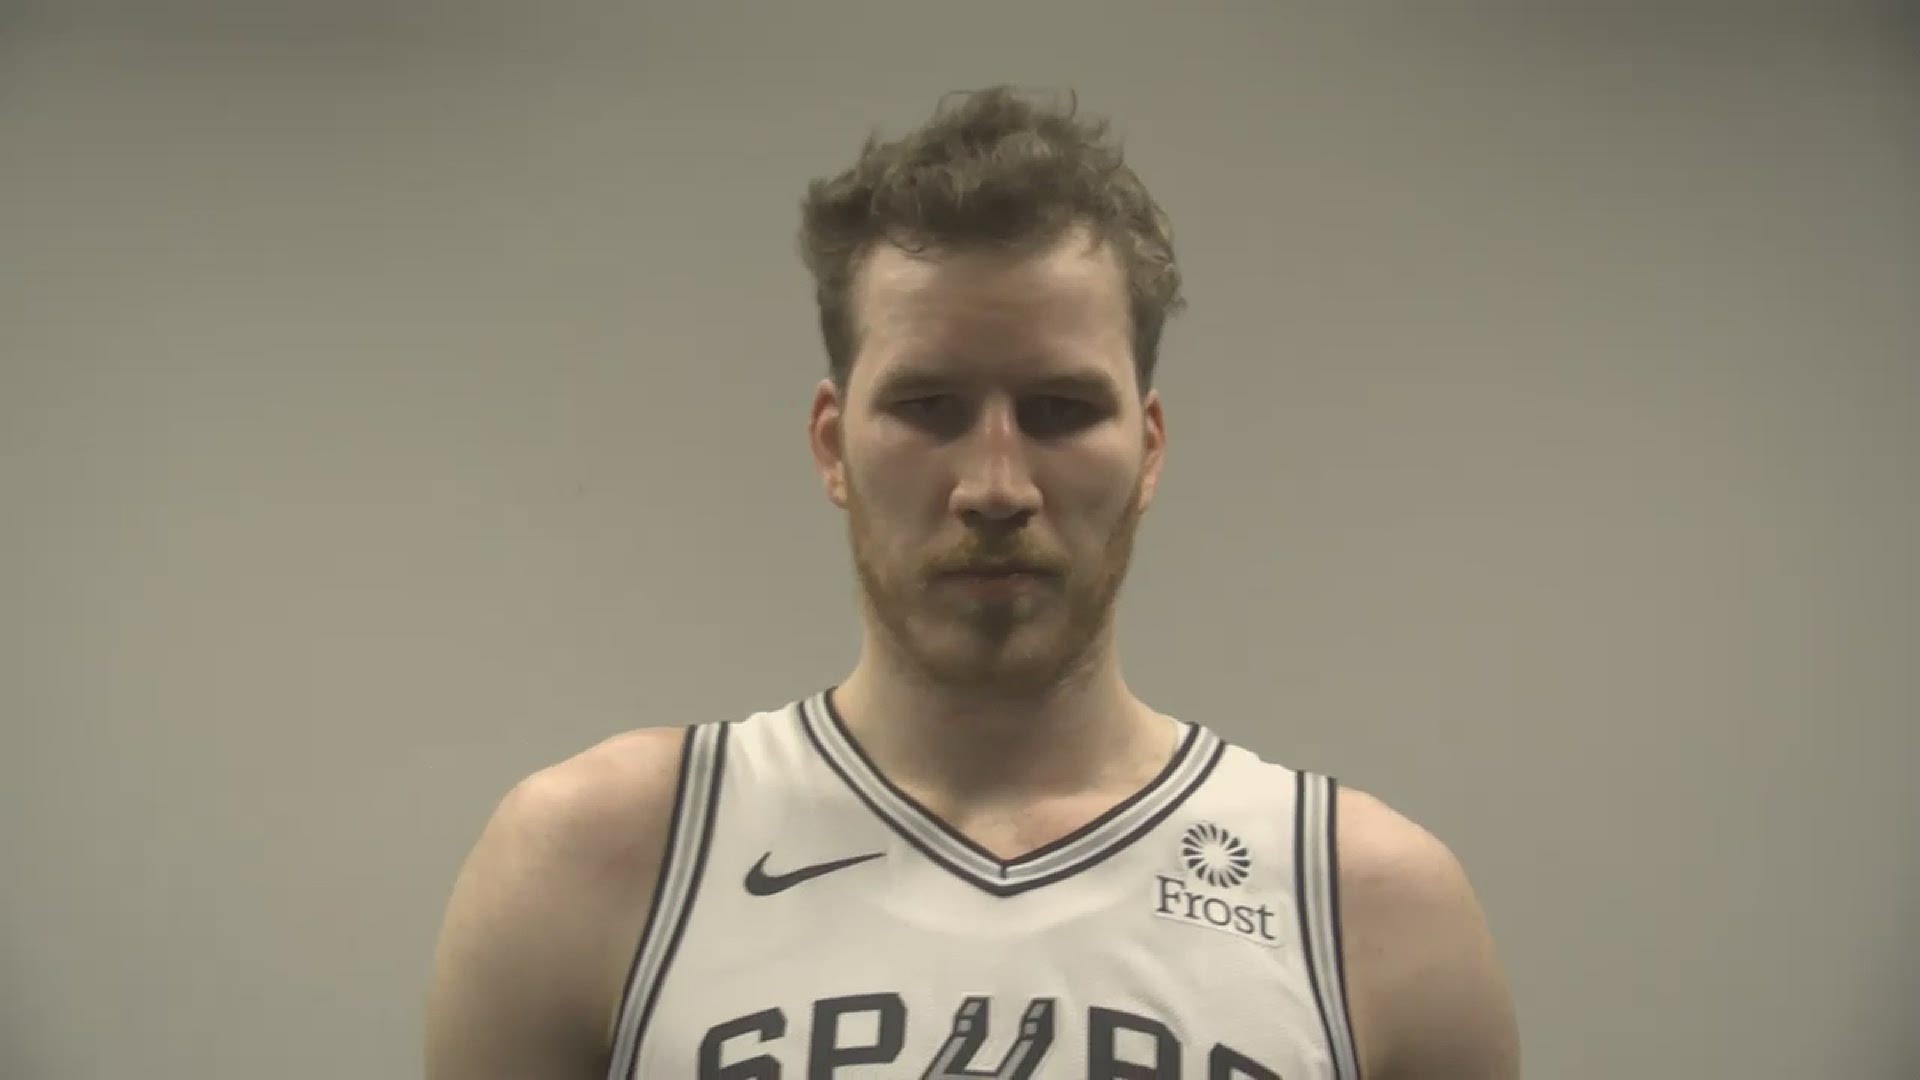 Poeltl talked about how he had his best game of the season, aggression on both ends, and responded to Coach Pop calling him the star of the game.